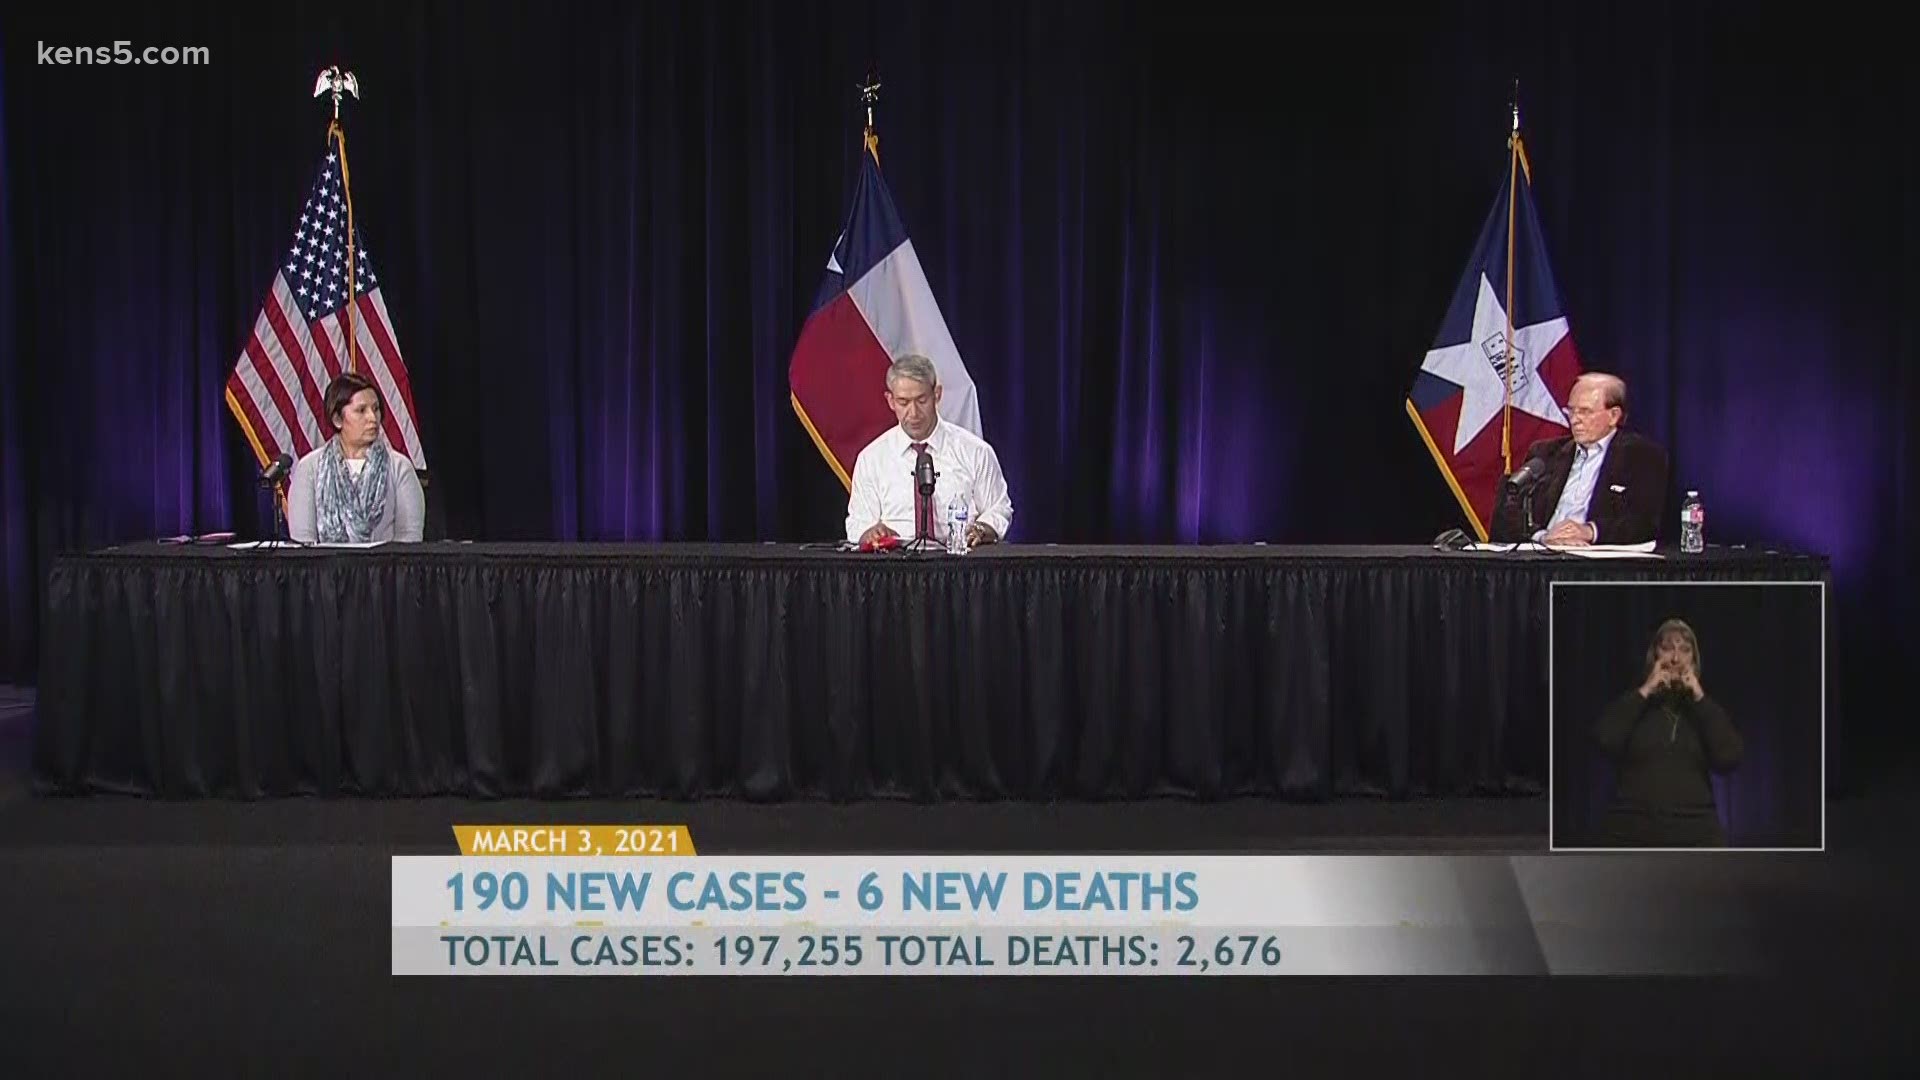 Mayor Nirenberg reported 190 new cases, bringing the total to 197,255. He also reported six new deaths, bringing the local death toll to 2,676.